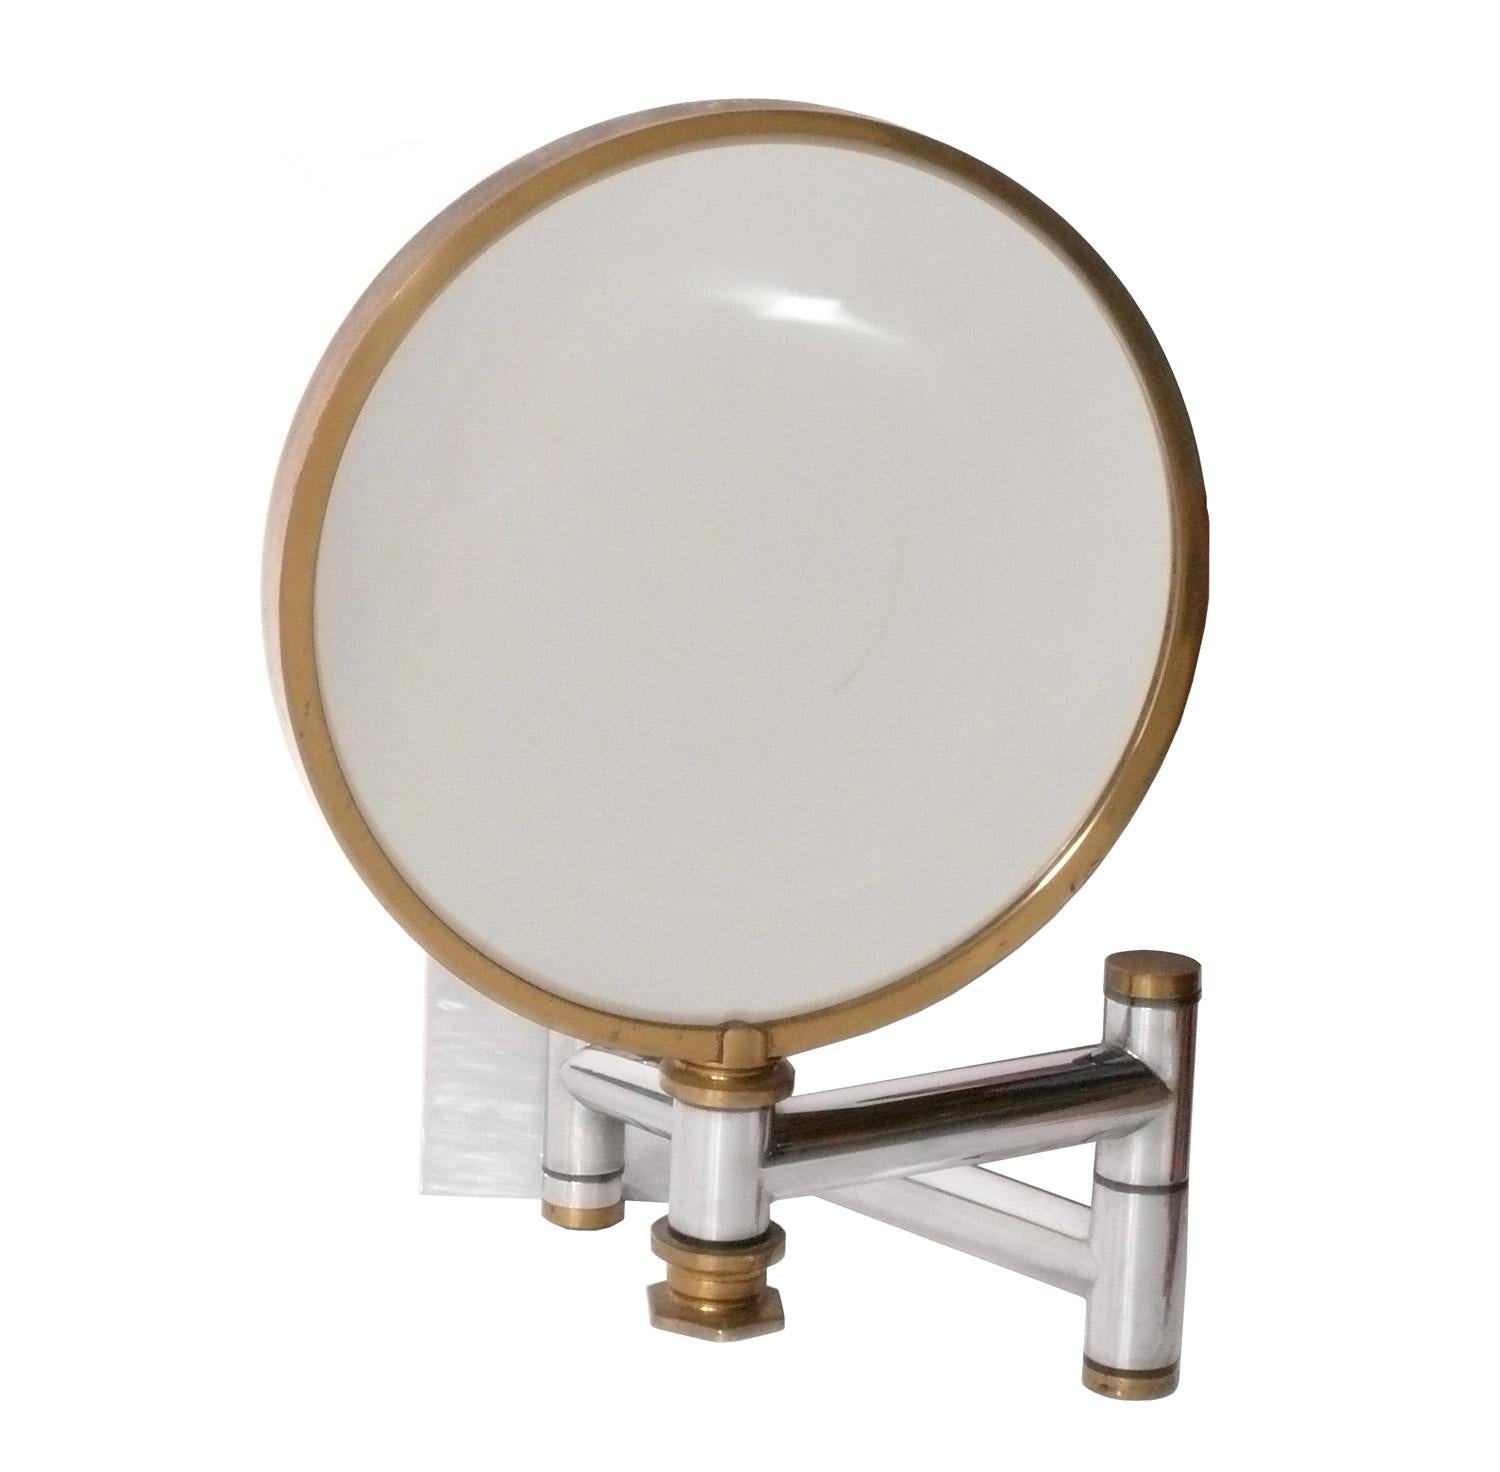 Elegant Chrome and Brass Magnifying Mirror, designed by Karl Springer, American, circa 1980s. Rare, hard to find Springer design. The only other two examples online are priced at $8500 and $7500. The diameter of the mirror is 13.5